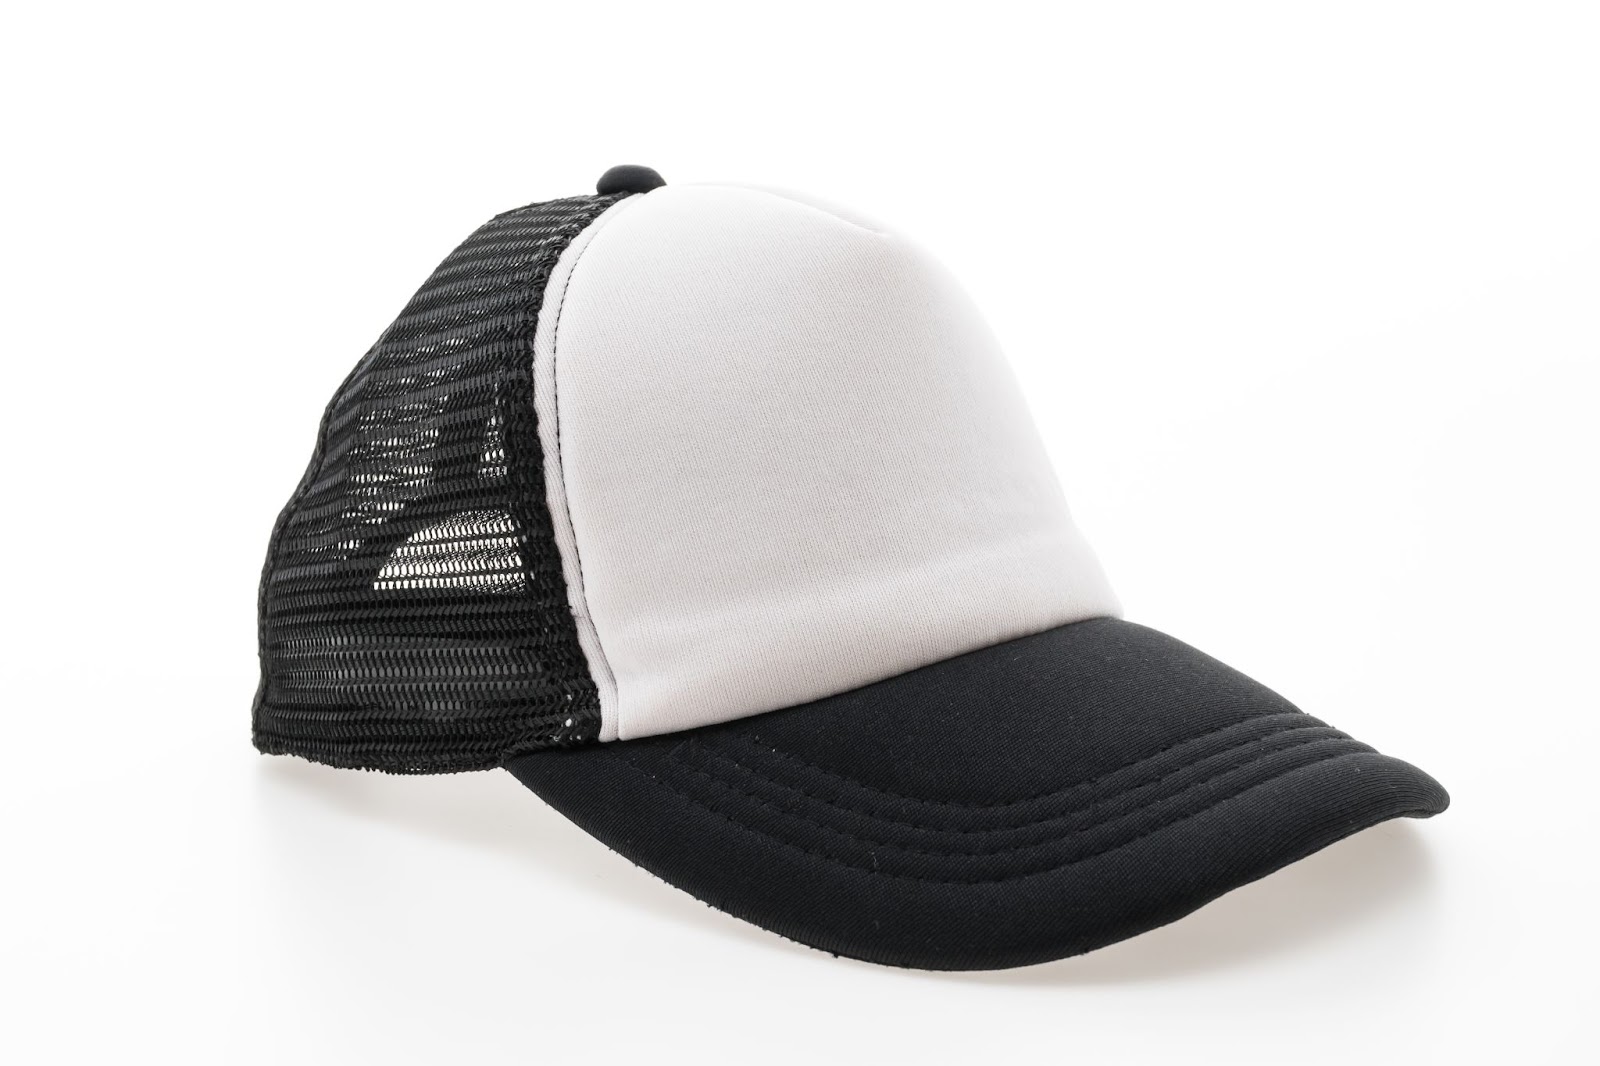 They Hats – DapperFam Are What Trucker by Back DAPPERFAM in are Style? and Why